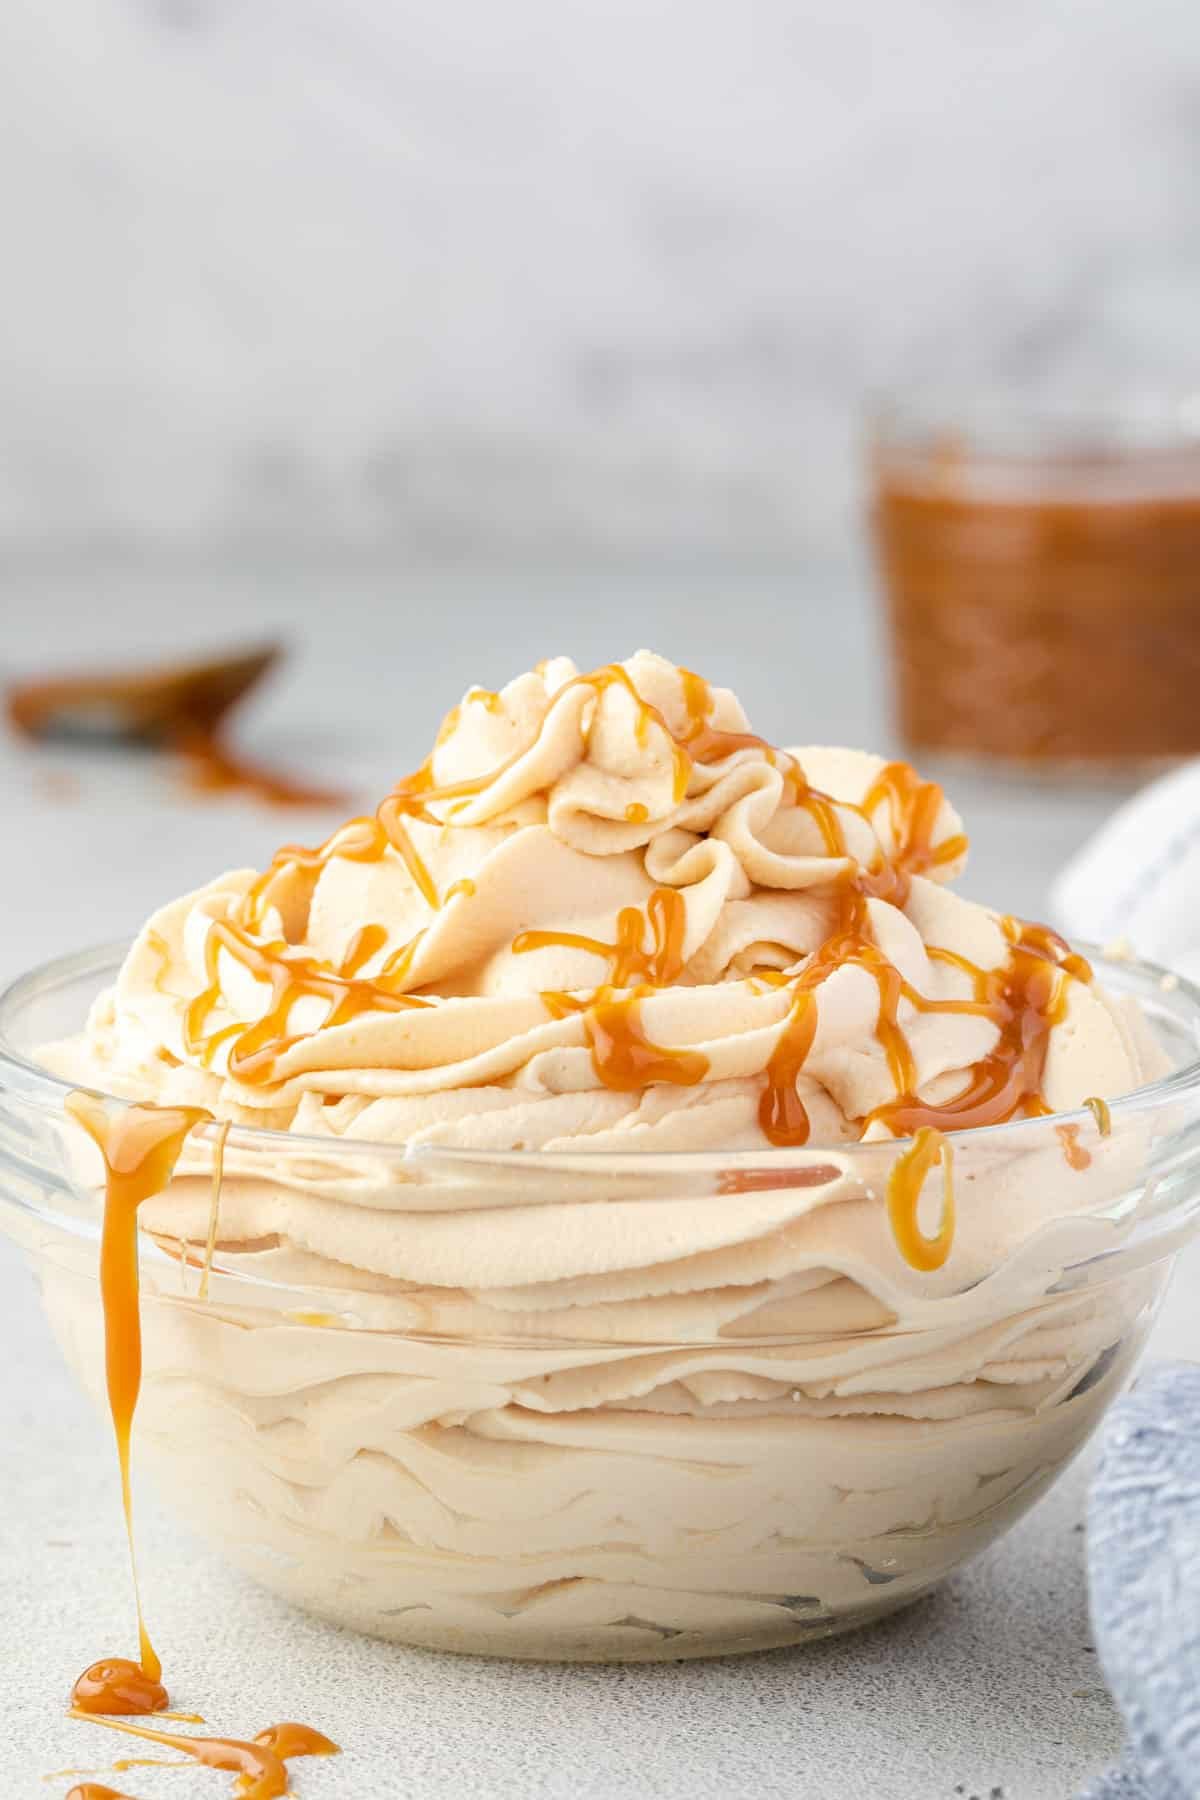 Whipped cream piled high in a bowl with caramel drizzled over it and dripping off of it.